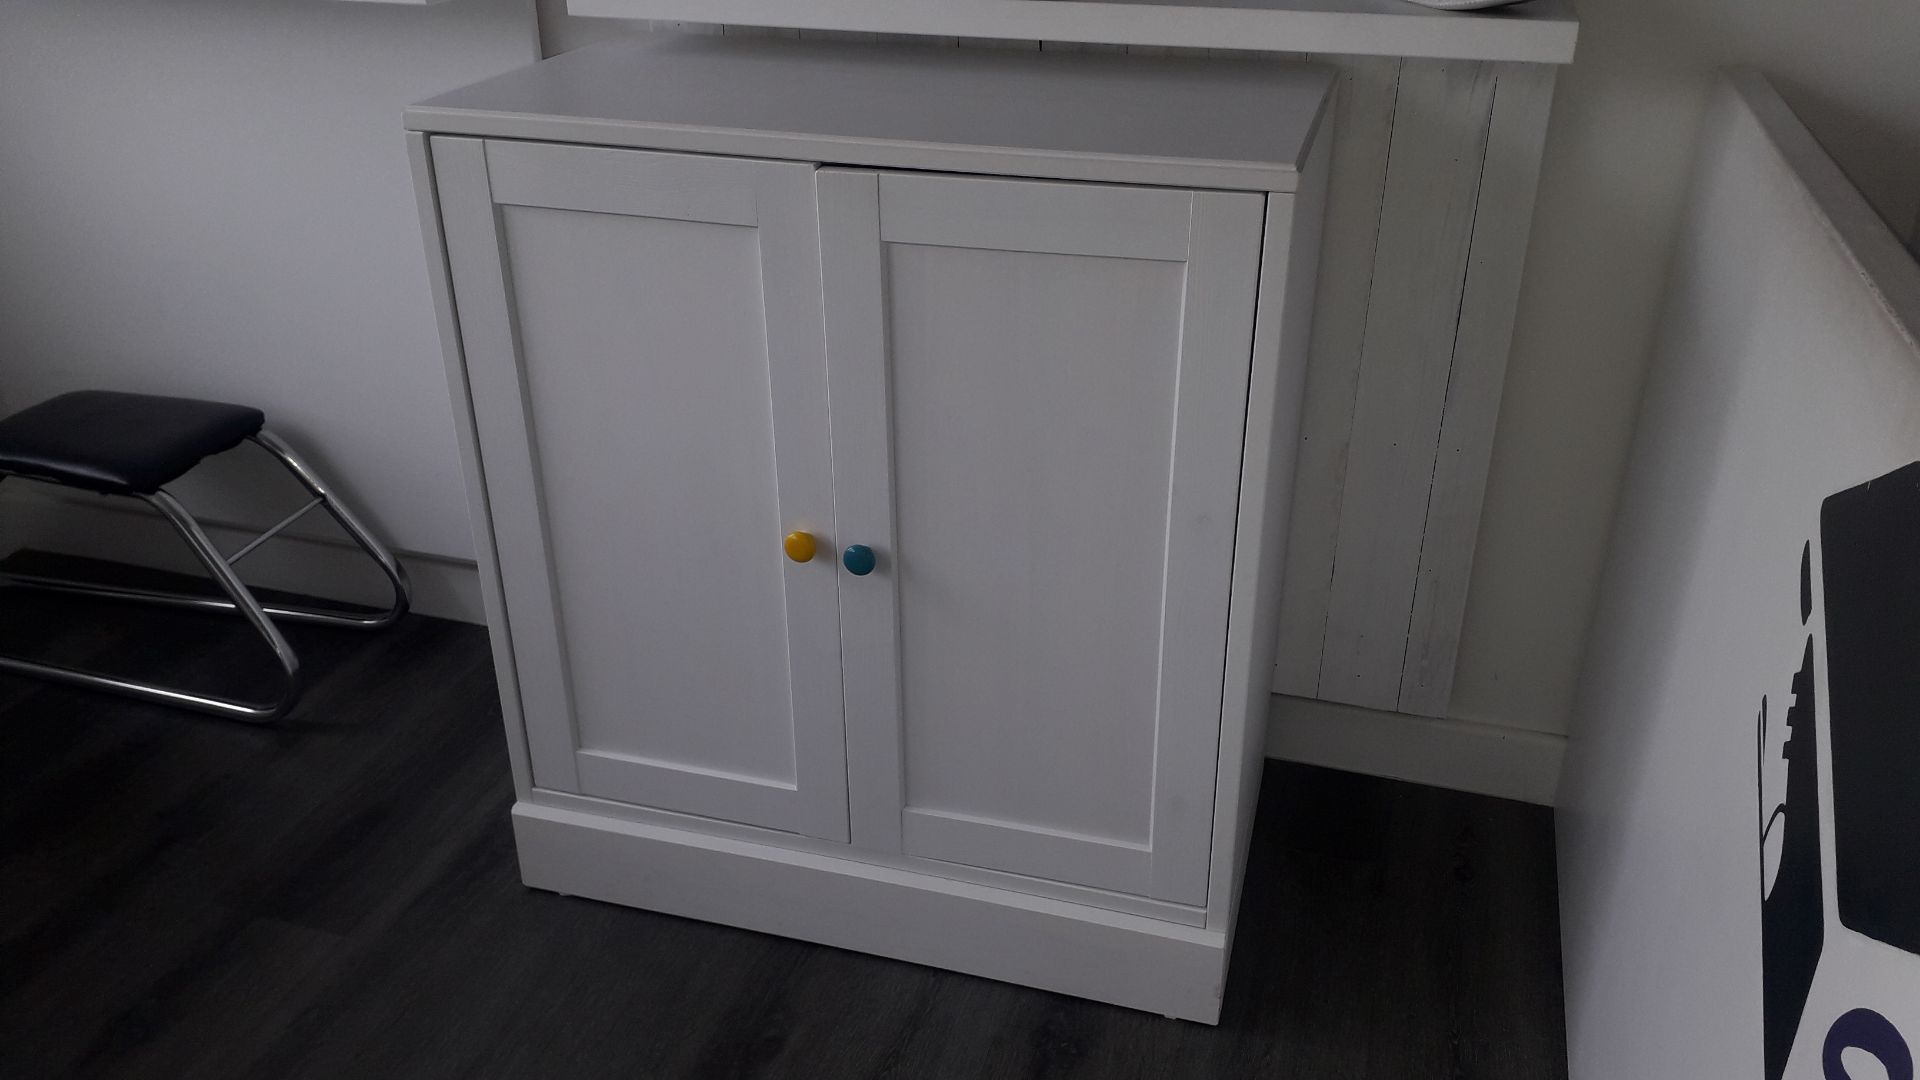 4 x Twin Door Ikea cabinets – contents excluded - Image 2 of 3